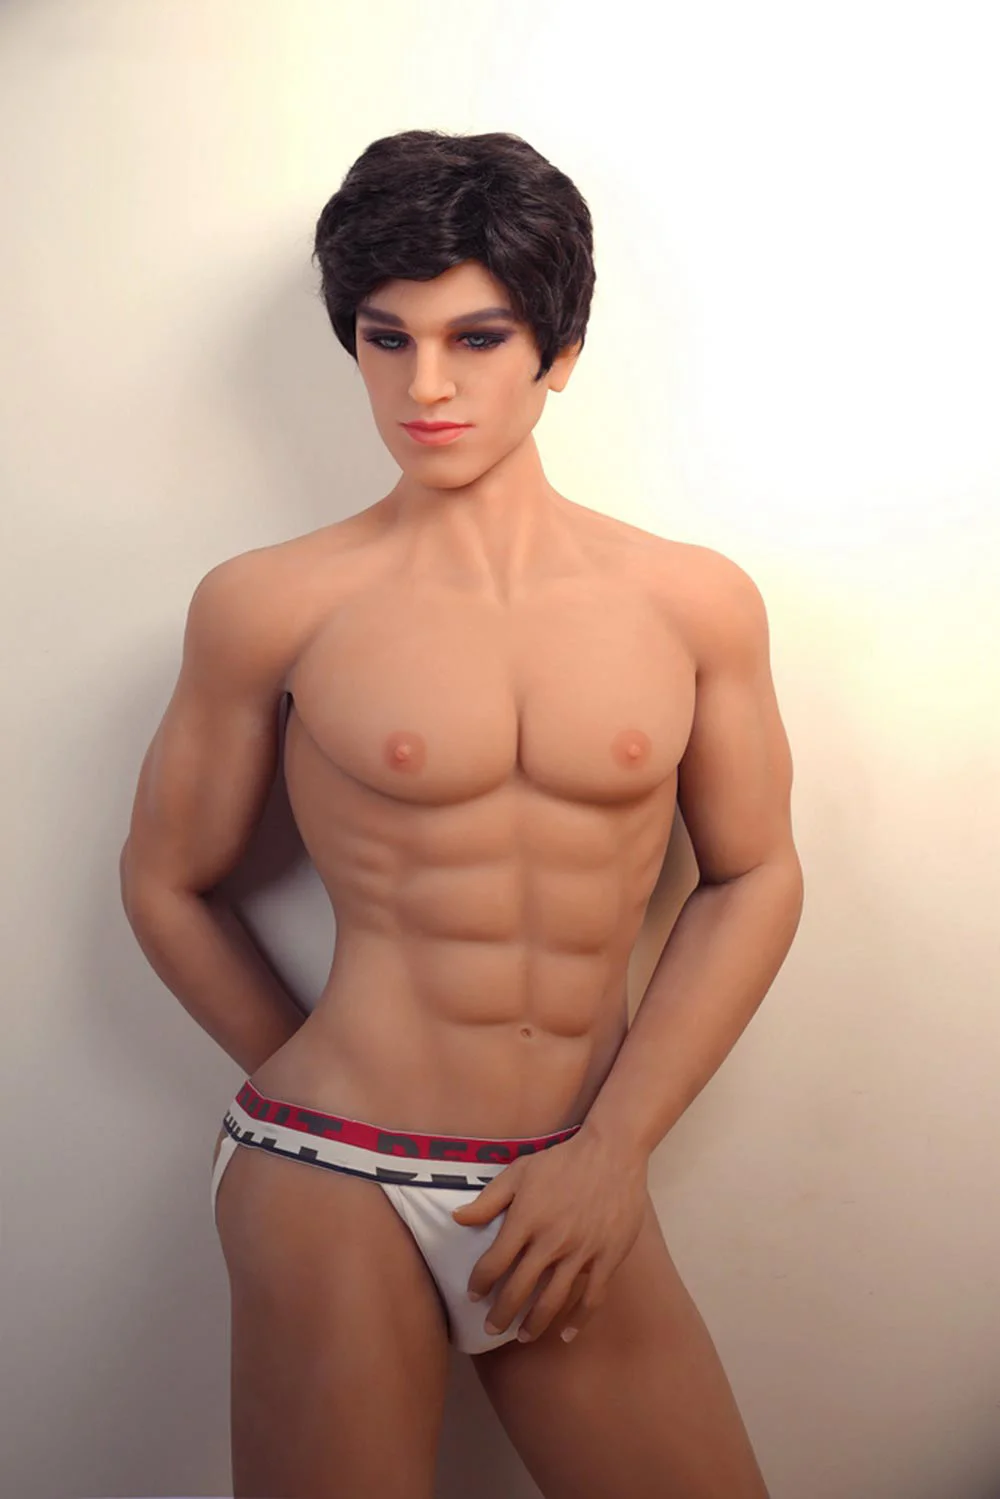 Male-sex-doll-with-hands-on-panties